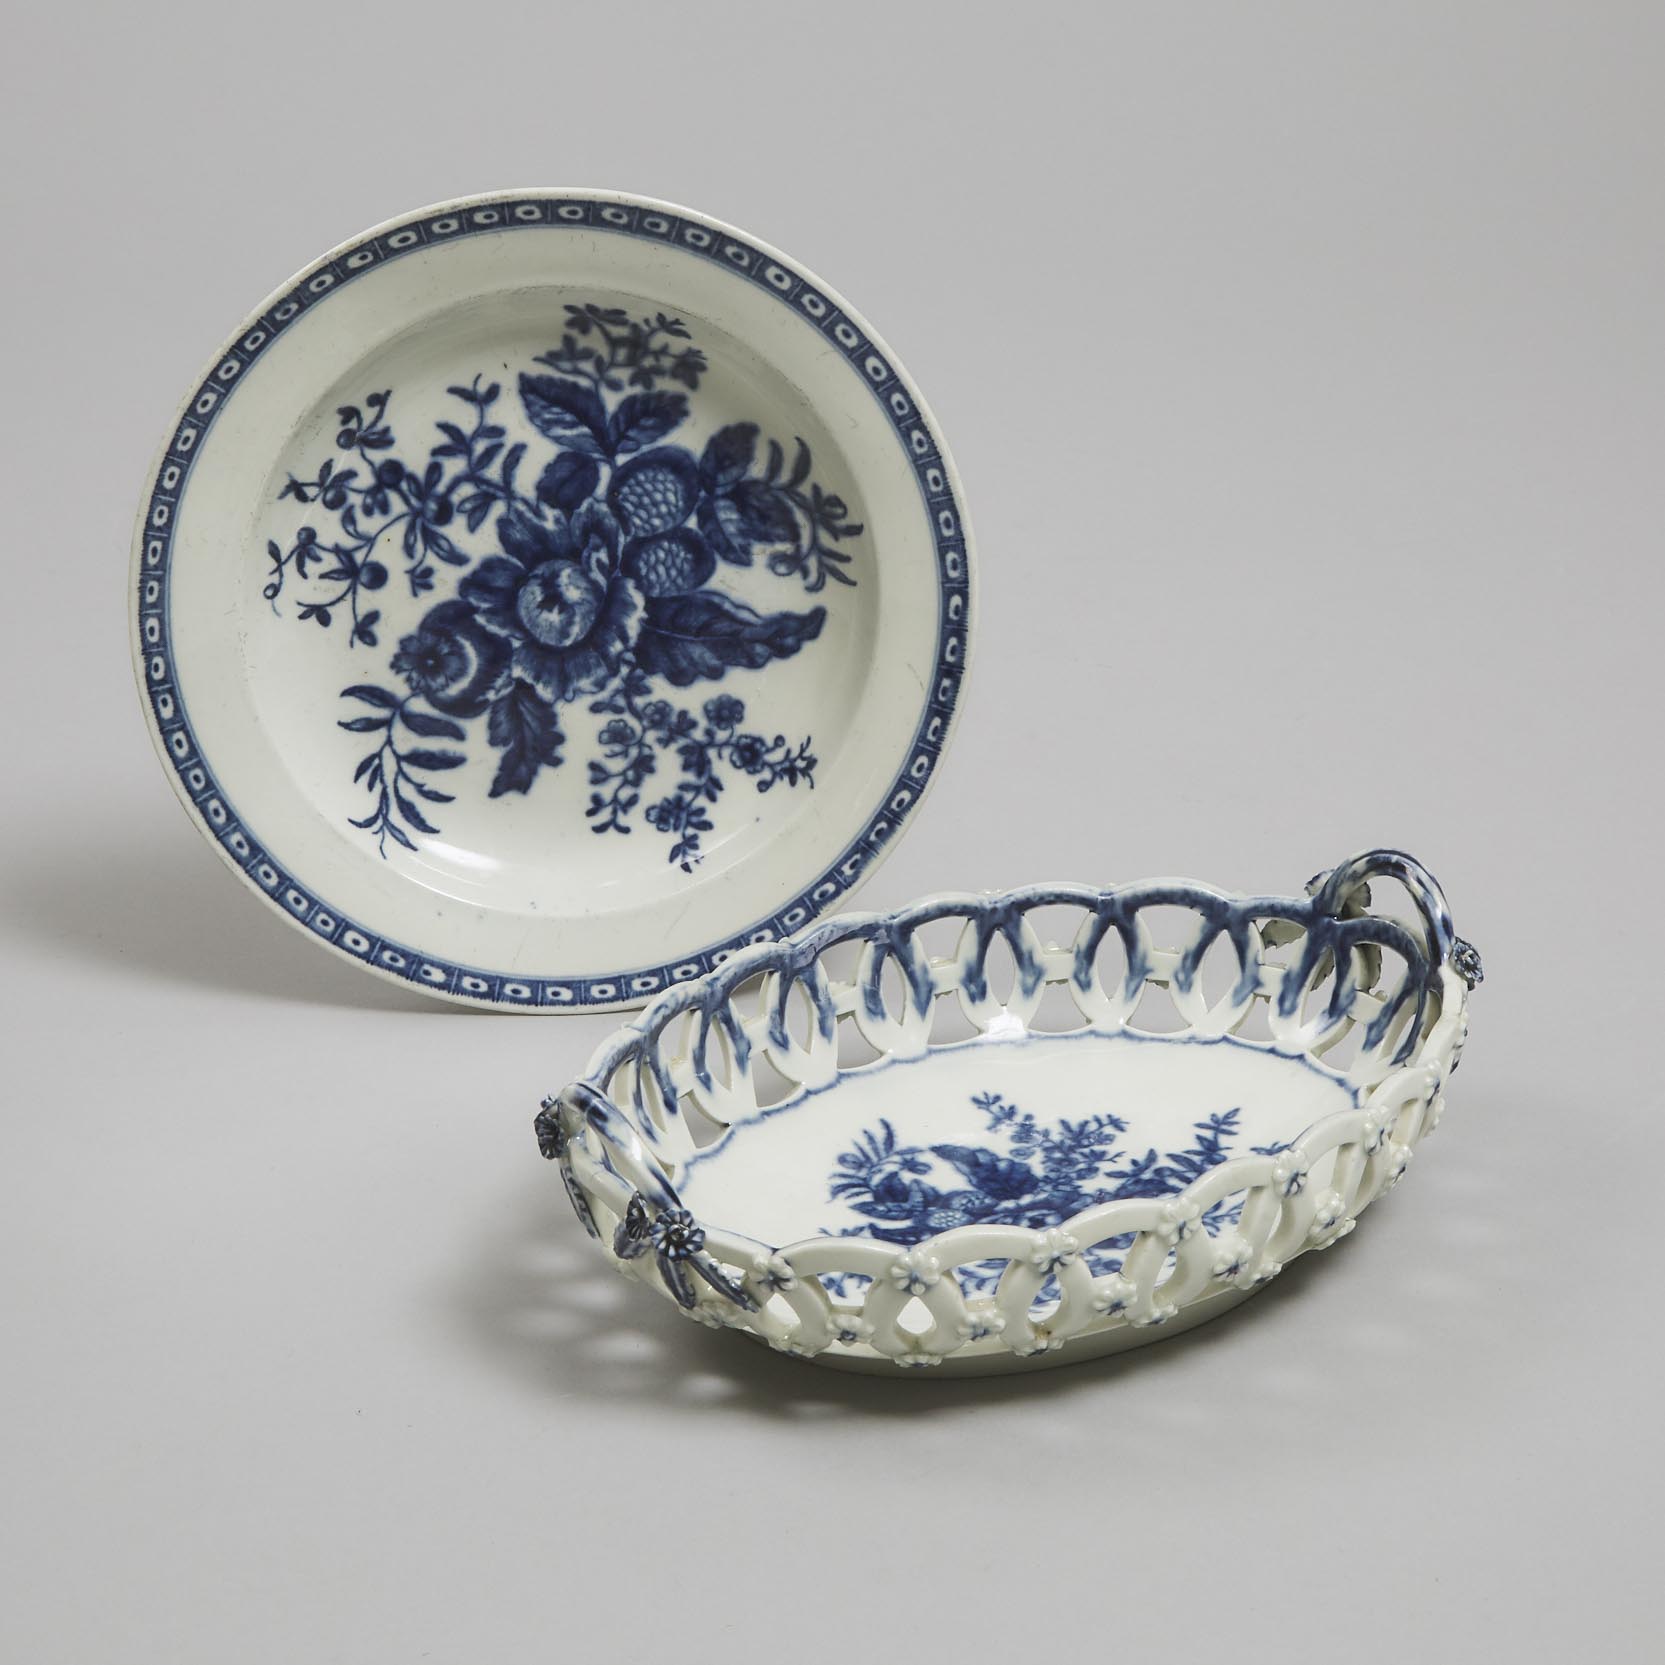 Worcester 'Pine Cone' Pattern Oval Basket and Plate, c.1780